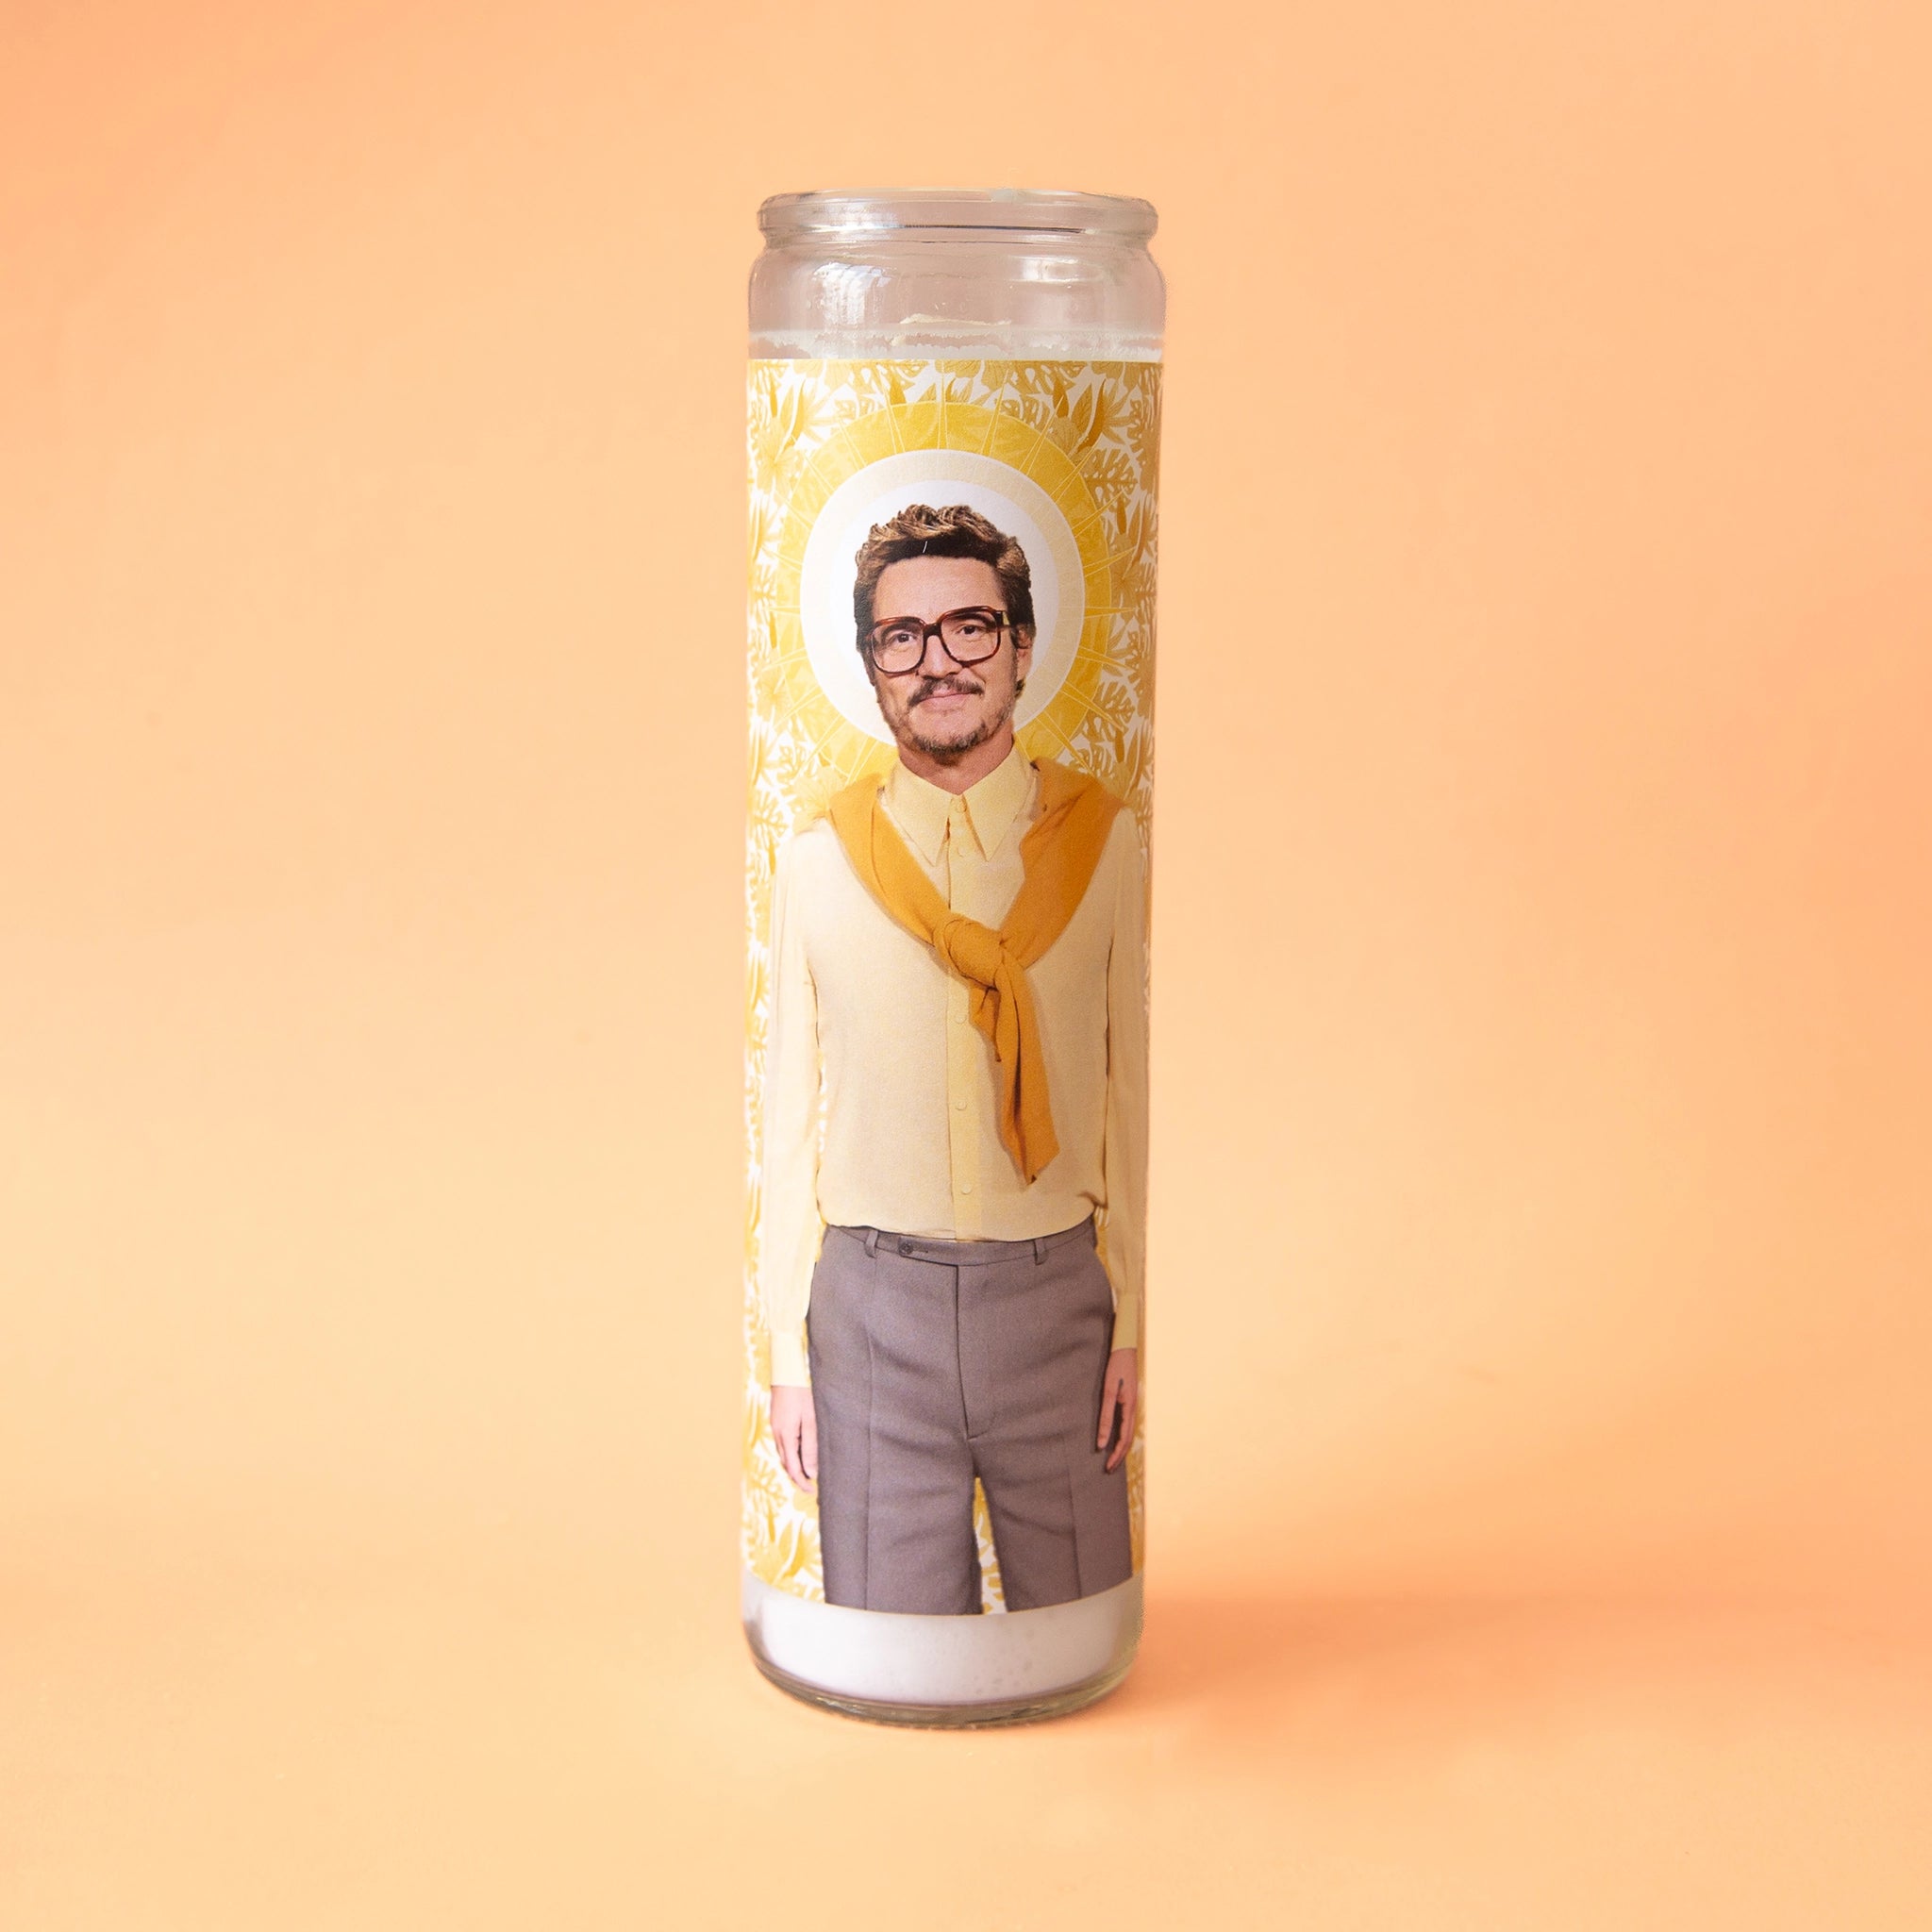 On a yellow background is a tall thin prayer candle in a clear glass jar with a label on the front featuring a photograph of Pedro Pascal in glasses and wearing grey slacks a yellow button down and a orange sweater tied around his shoulders.